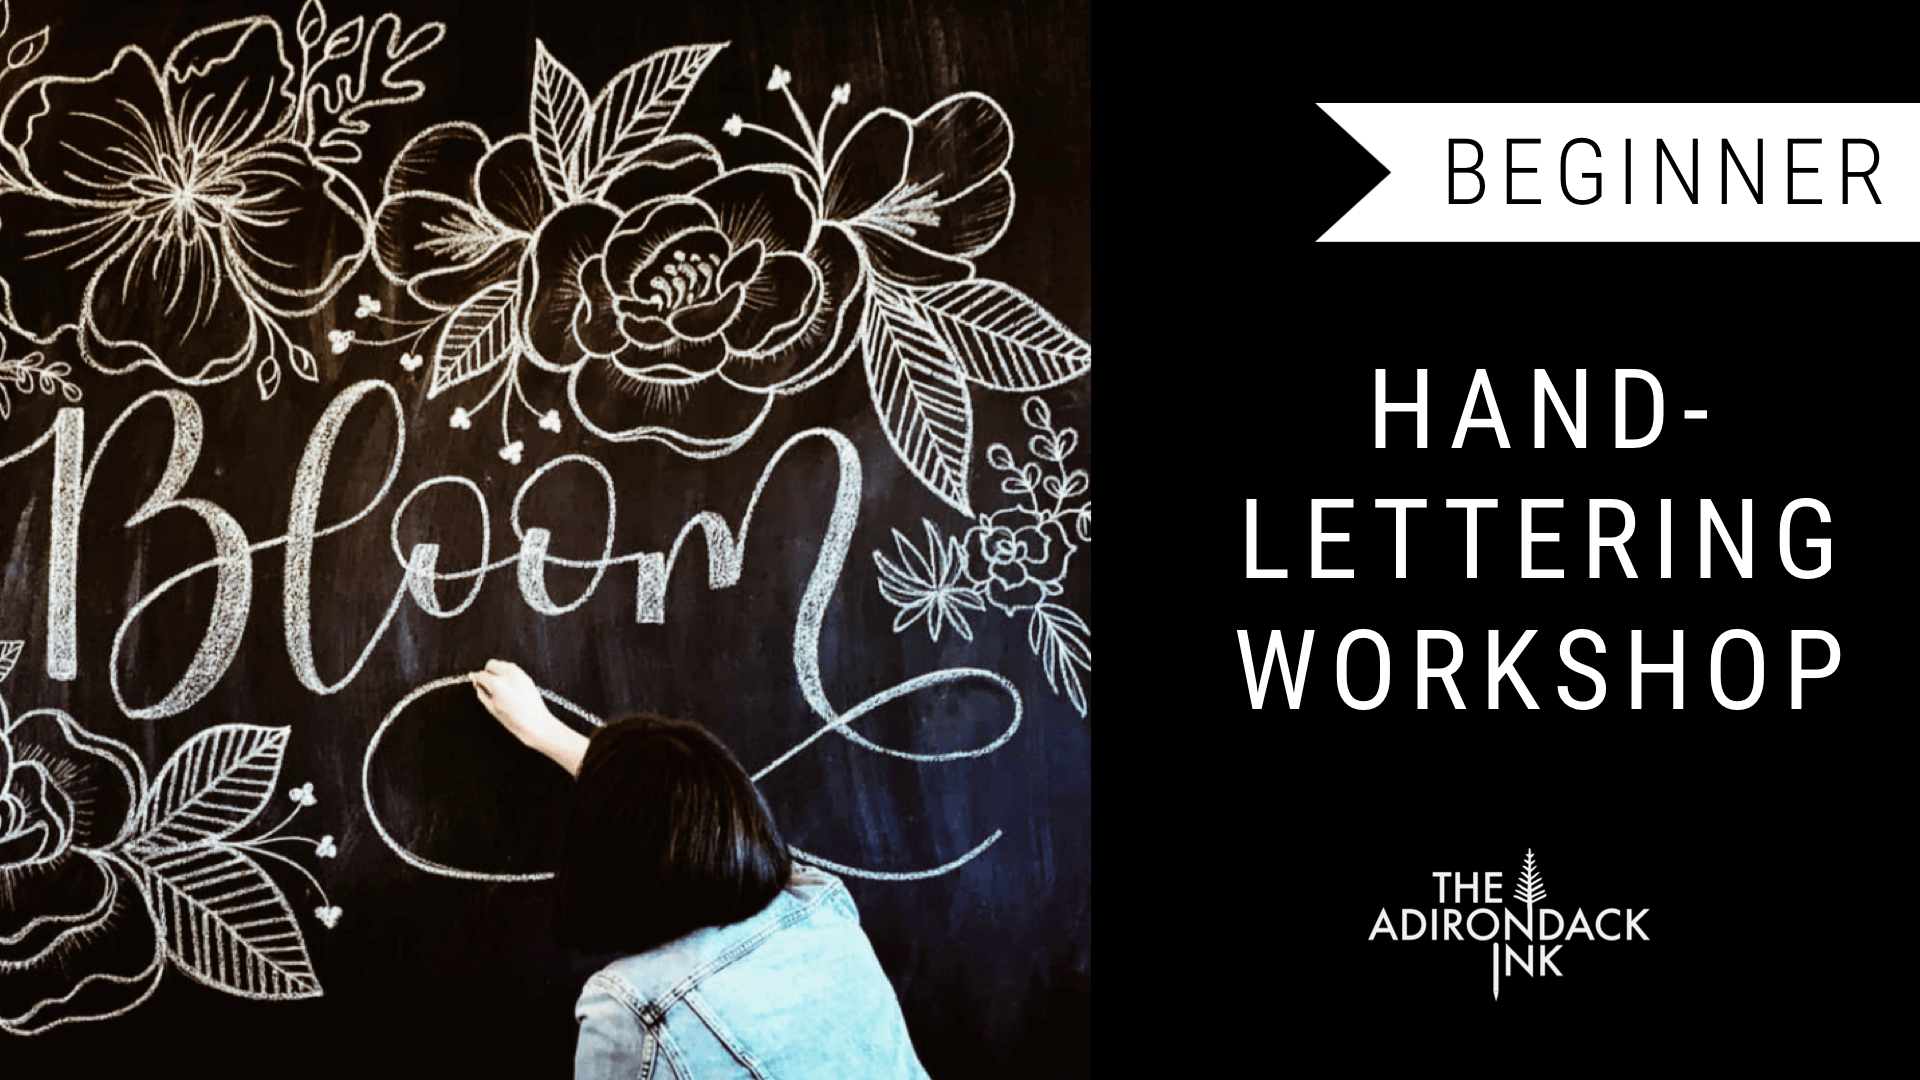 Hand Lettering Workshop Graphic and Text